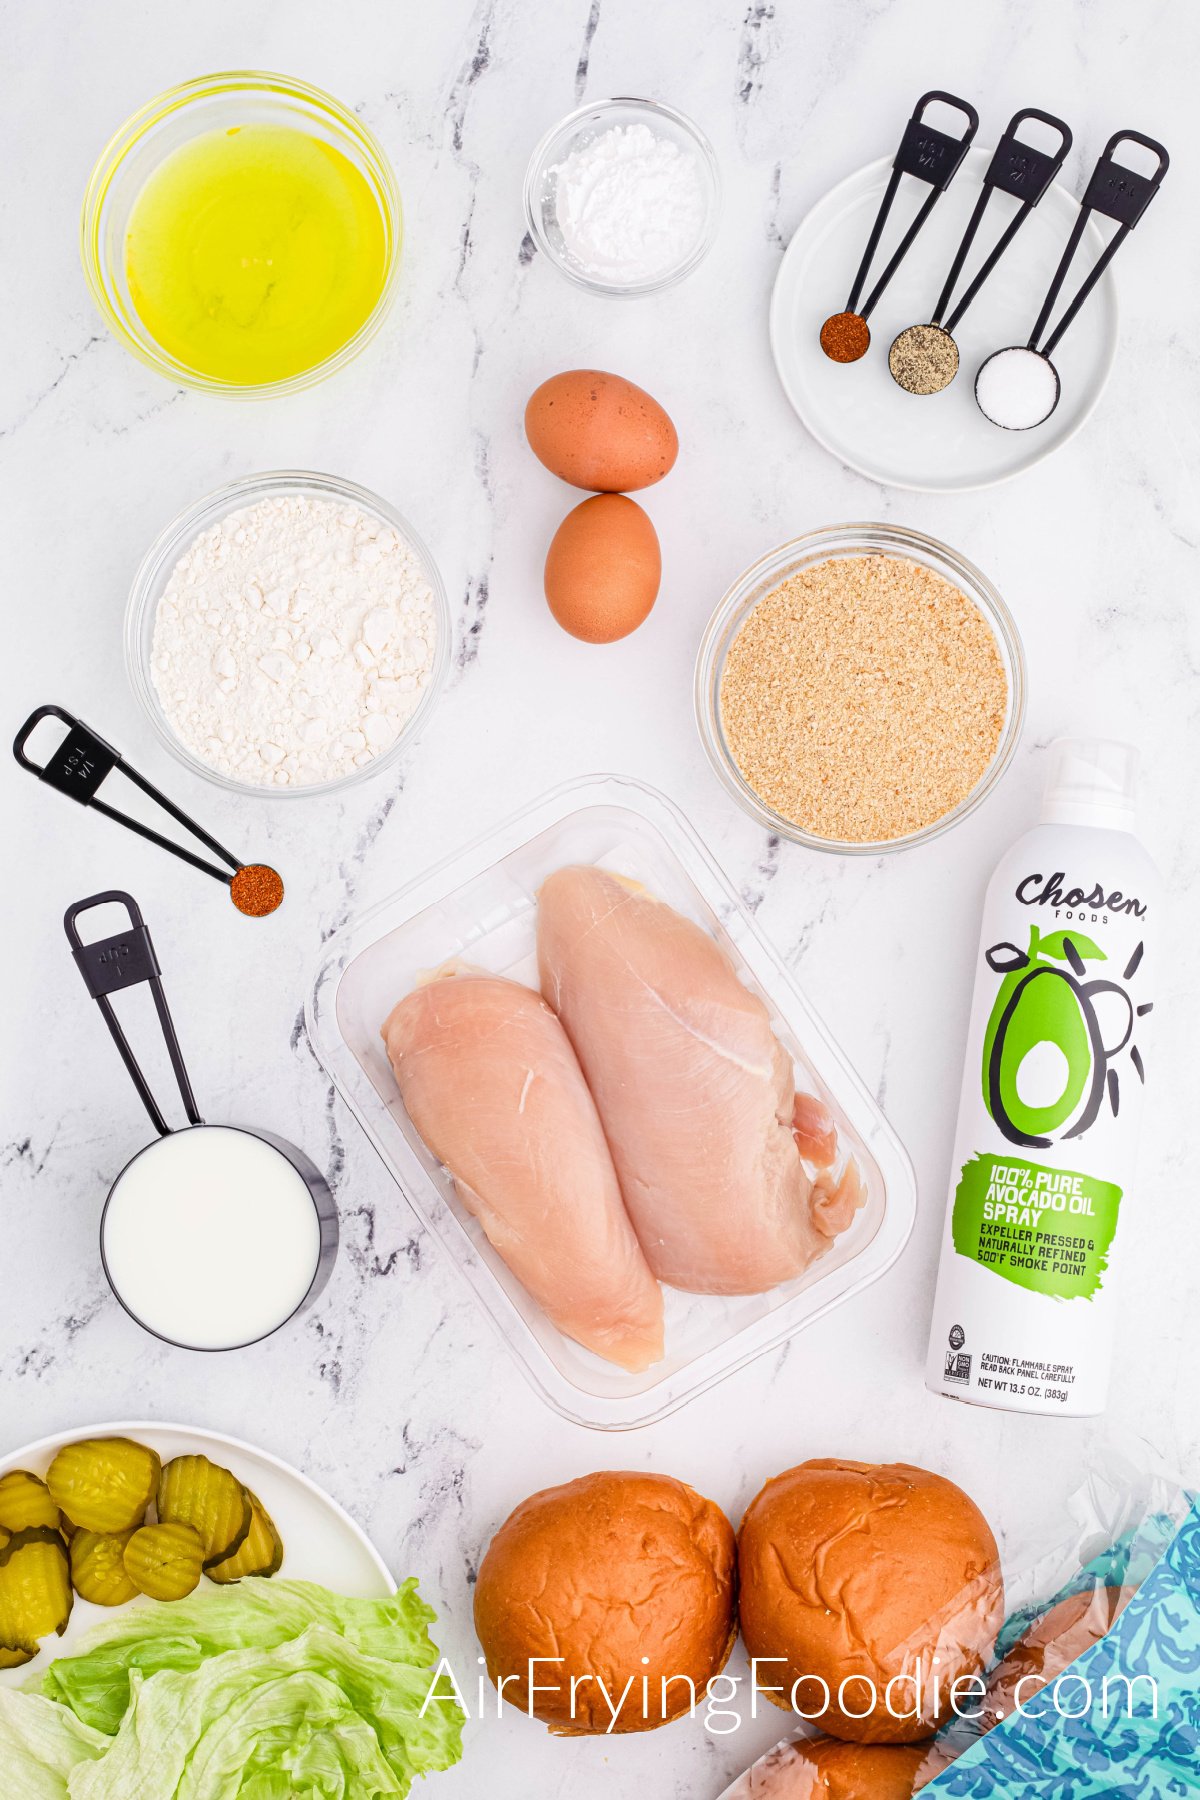 Picture of all the ingredients used to make copycat chick fil a sandwiches. Starting from the bottom of the photograph is an opened package of buns and a round white plate with lettuce and pickles. In the middle of the photo is a round black measuring cup of milk, a clear container of uncooked chicken, and a can of avocado oil. At the top of the image are four glass bowls, each containing a different ingredient; powdered sugar, flour, pickle juice, and breadcrumb. Two brown eggs, a round, and a white round plate with three measuring spoons, each holding a different ingredient; white pepper paprika and chili powder. 